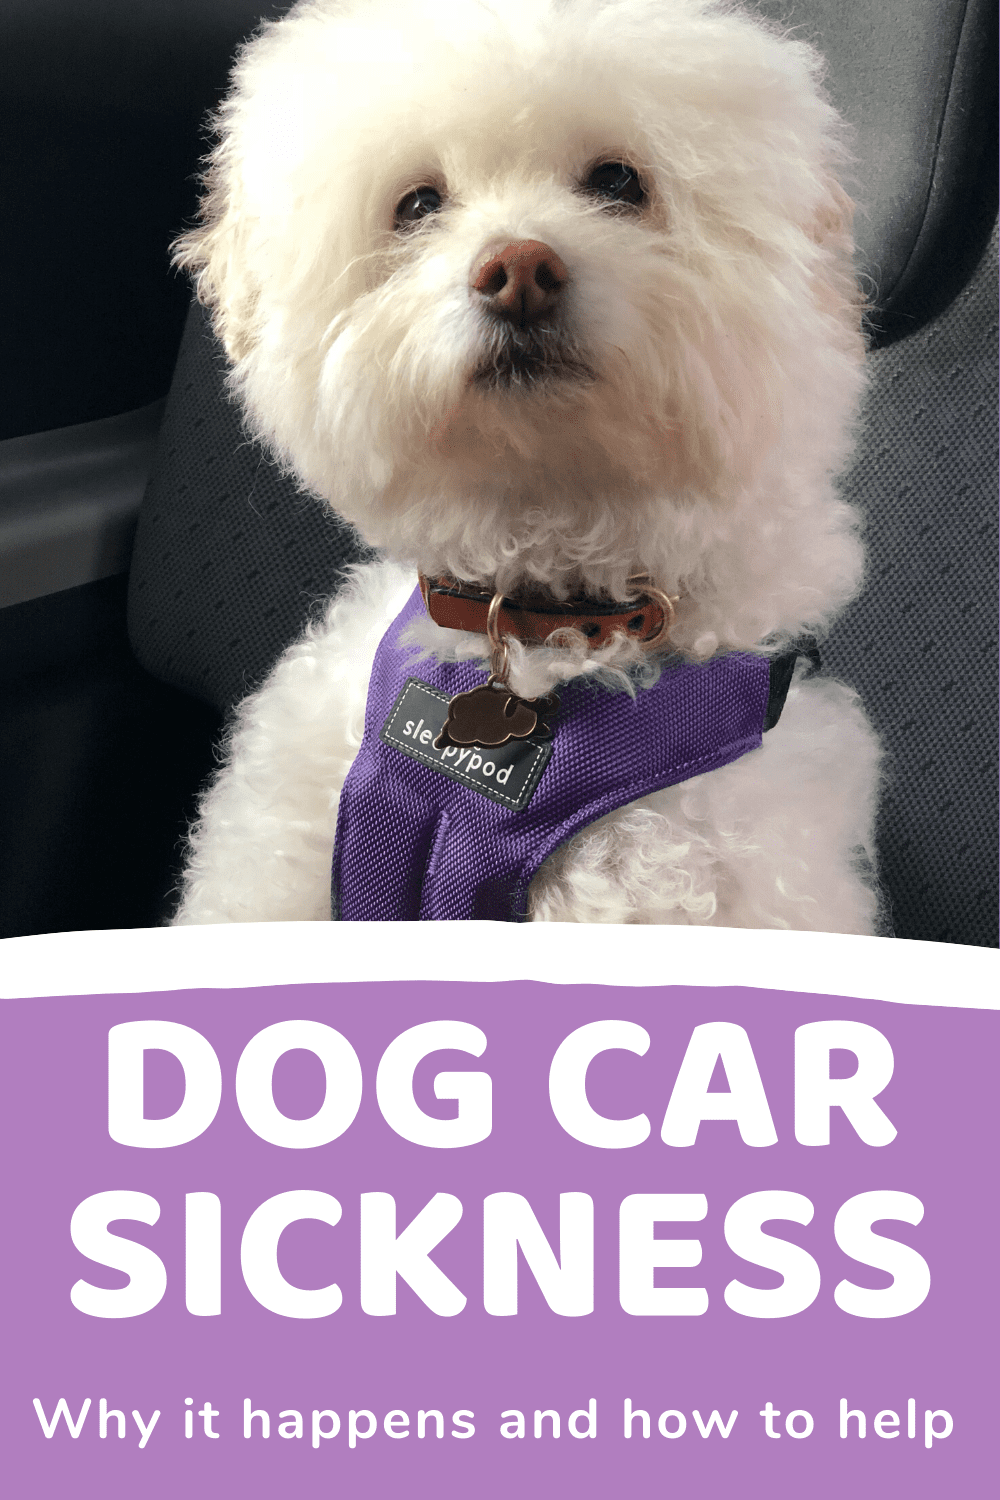 Dog Car sickness, how to help and prevent it